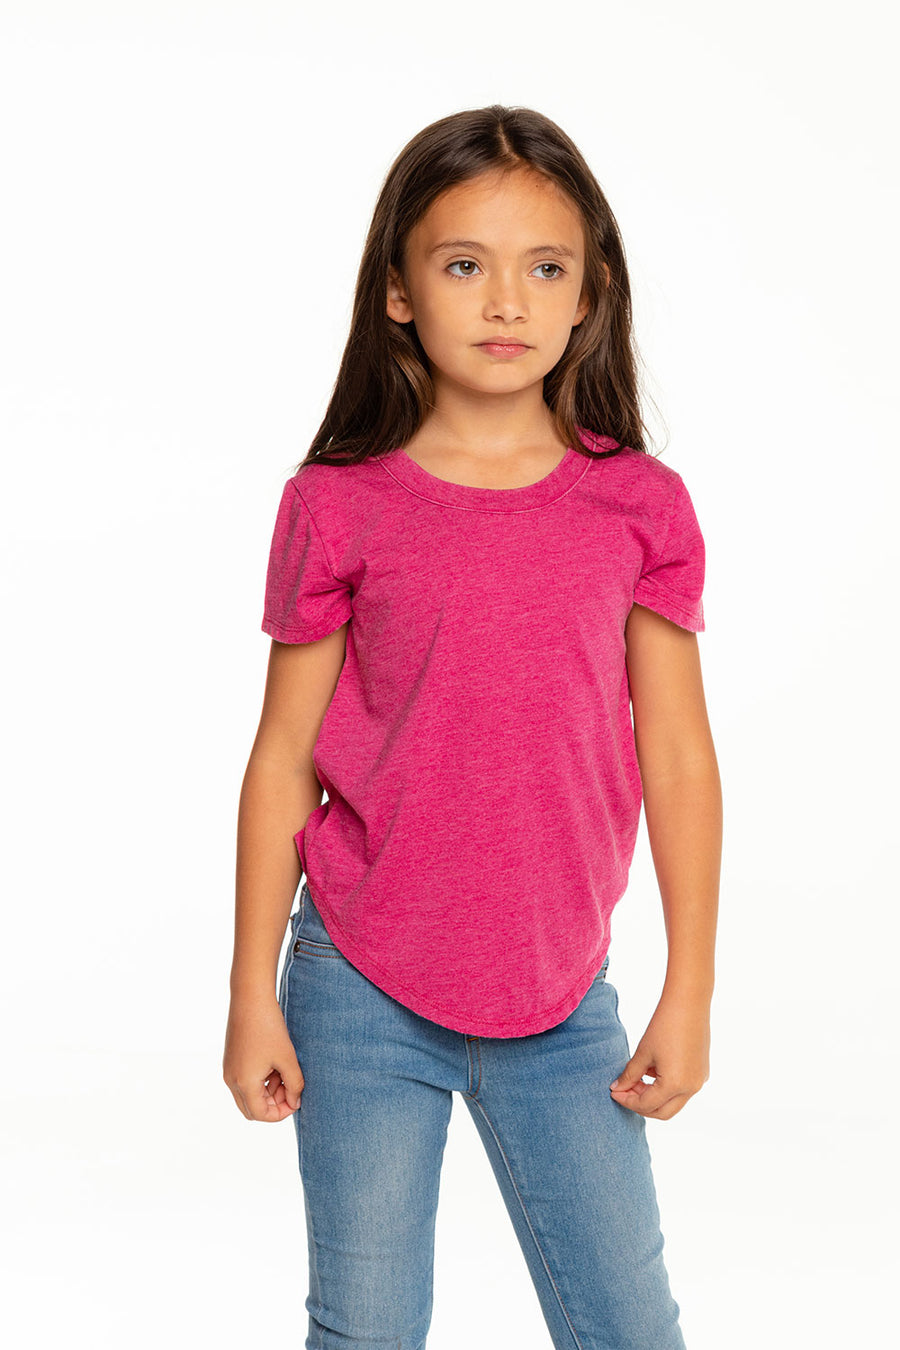 Girls Recycled Vintage Jersey Short Sleeve Scoop Back Shirt BCA - chaserbrand